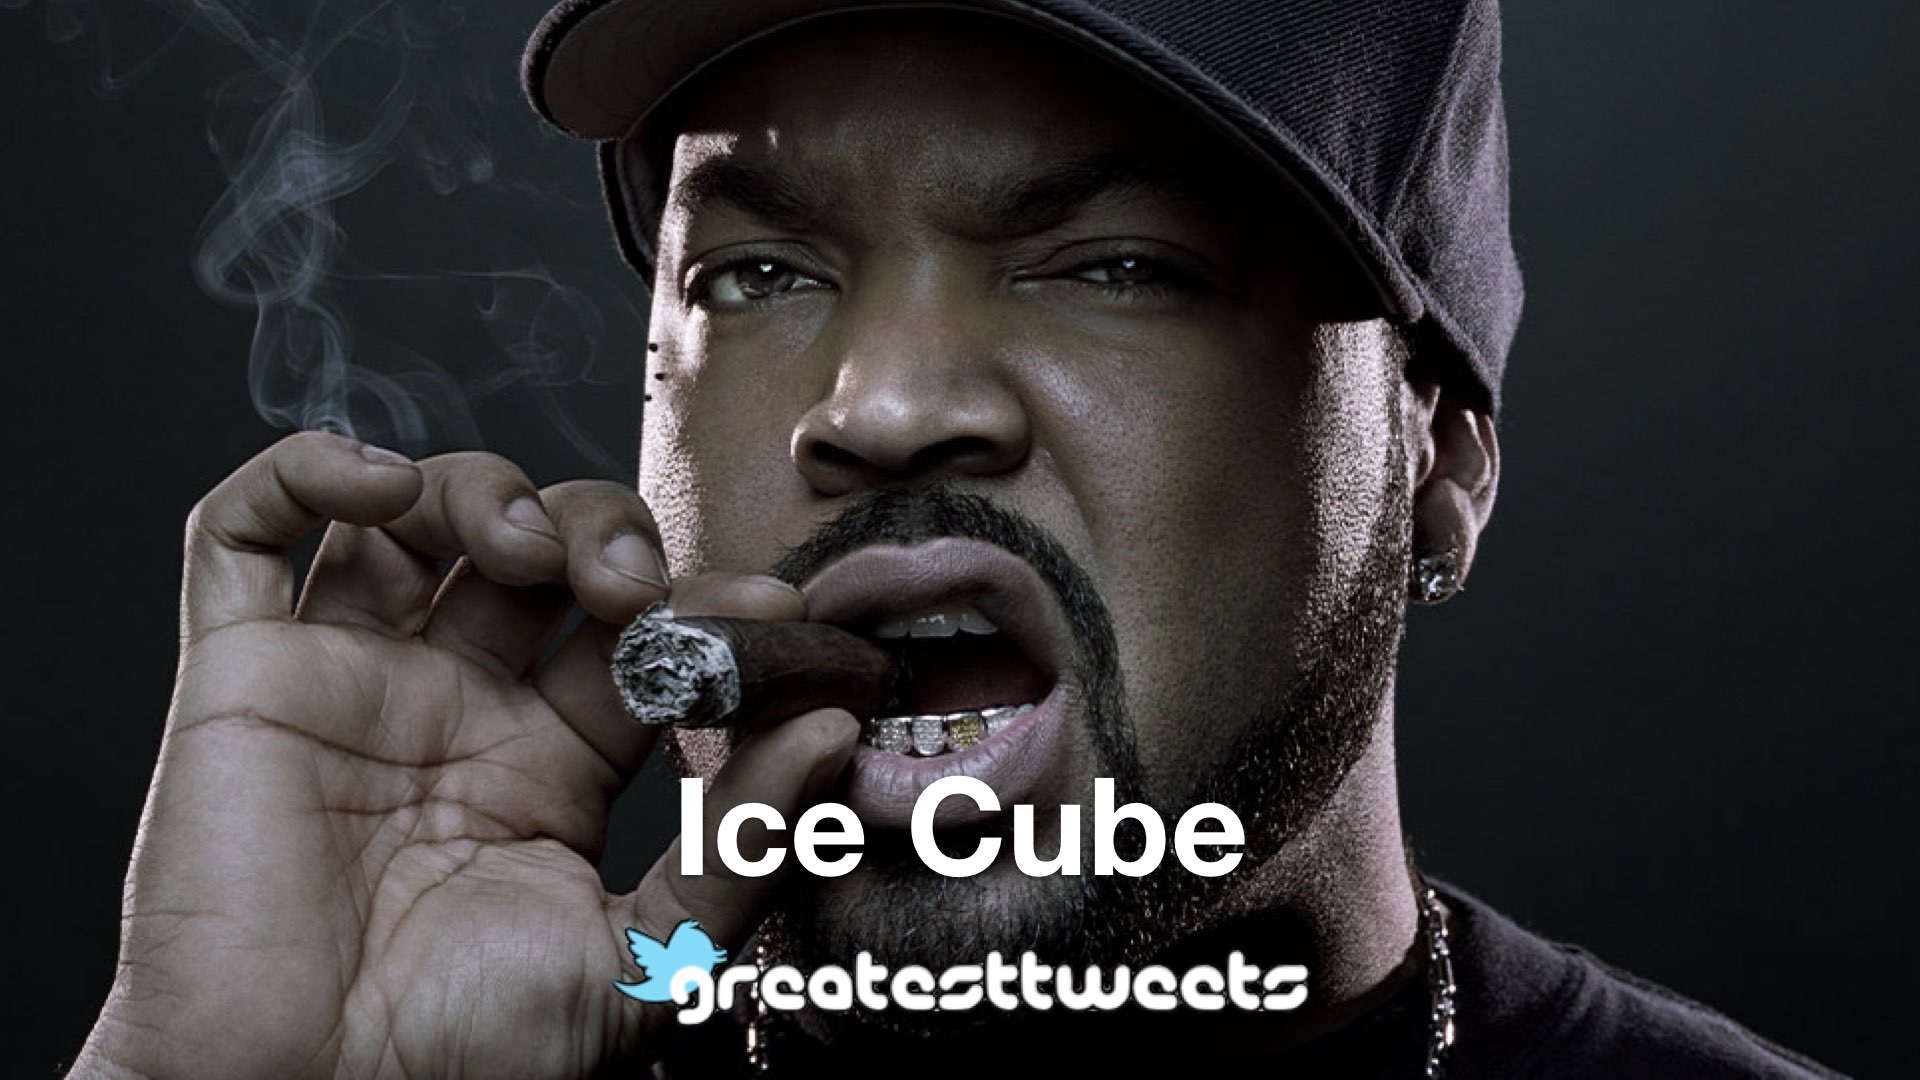 Ice cube feat. Ice Cube. Ice Cube Biography. Дом Ice Cube. Ice Cube и Dr Dre.